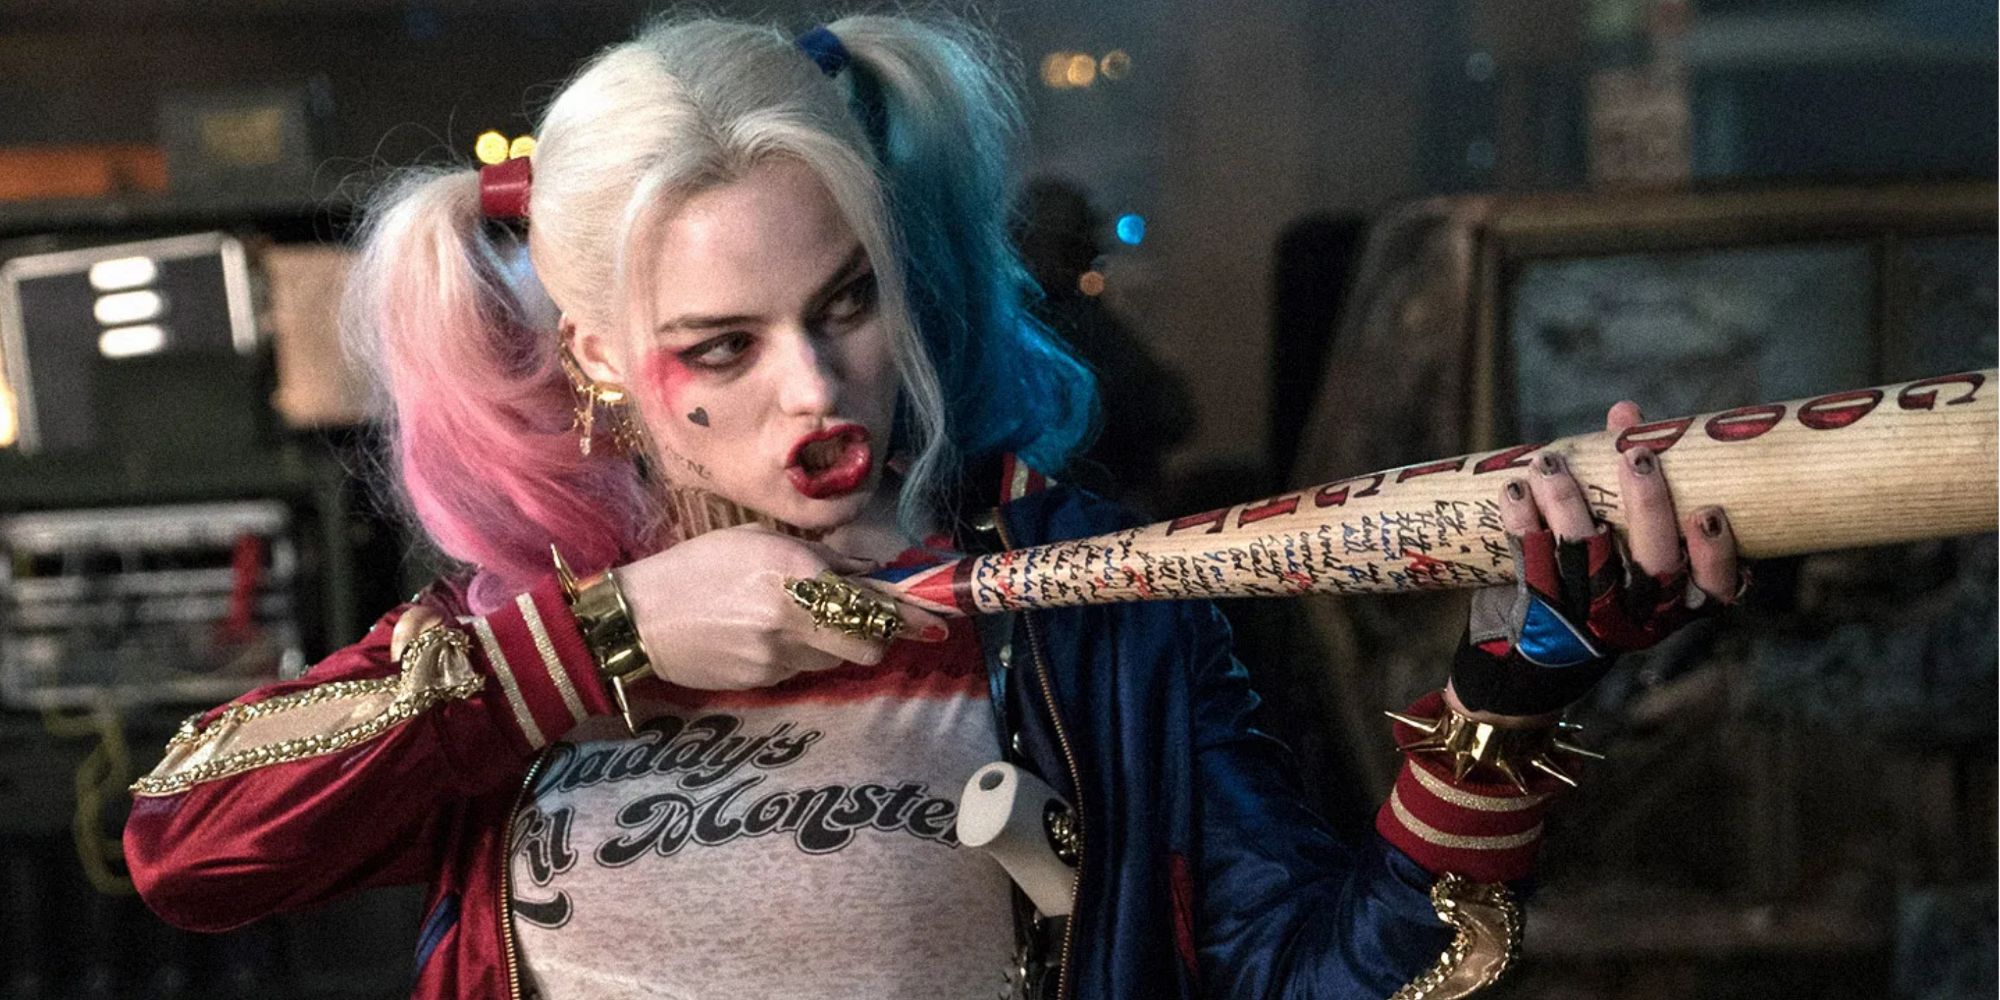 Margot Robbie as Harley Quinn in Suicide Squad (2016).